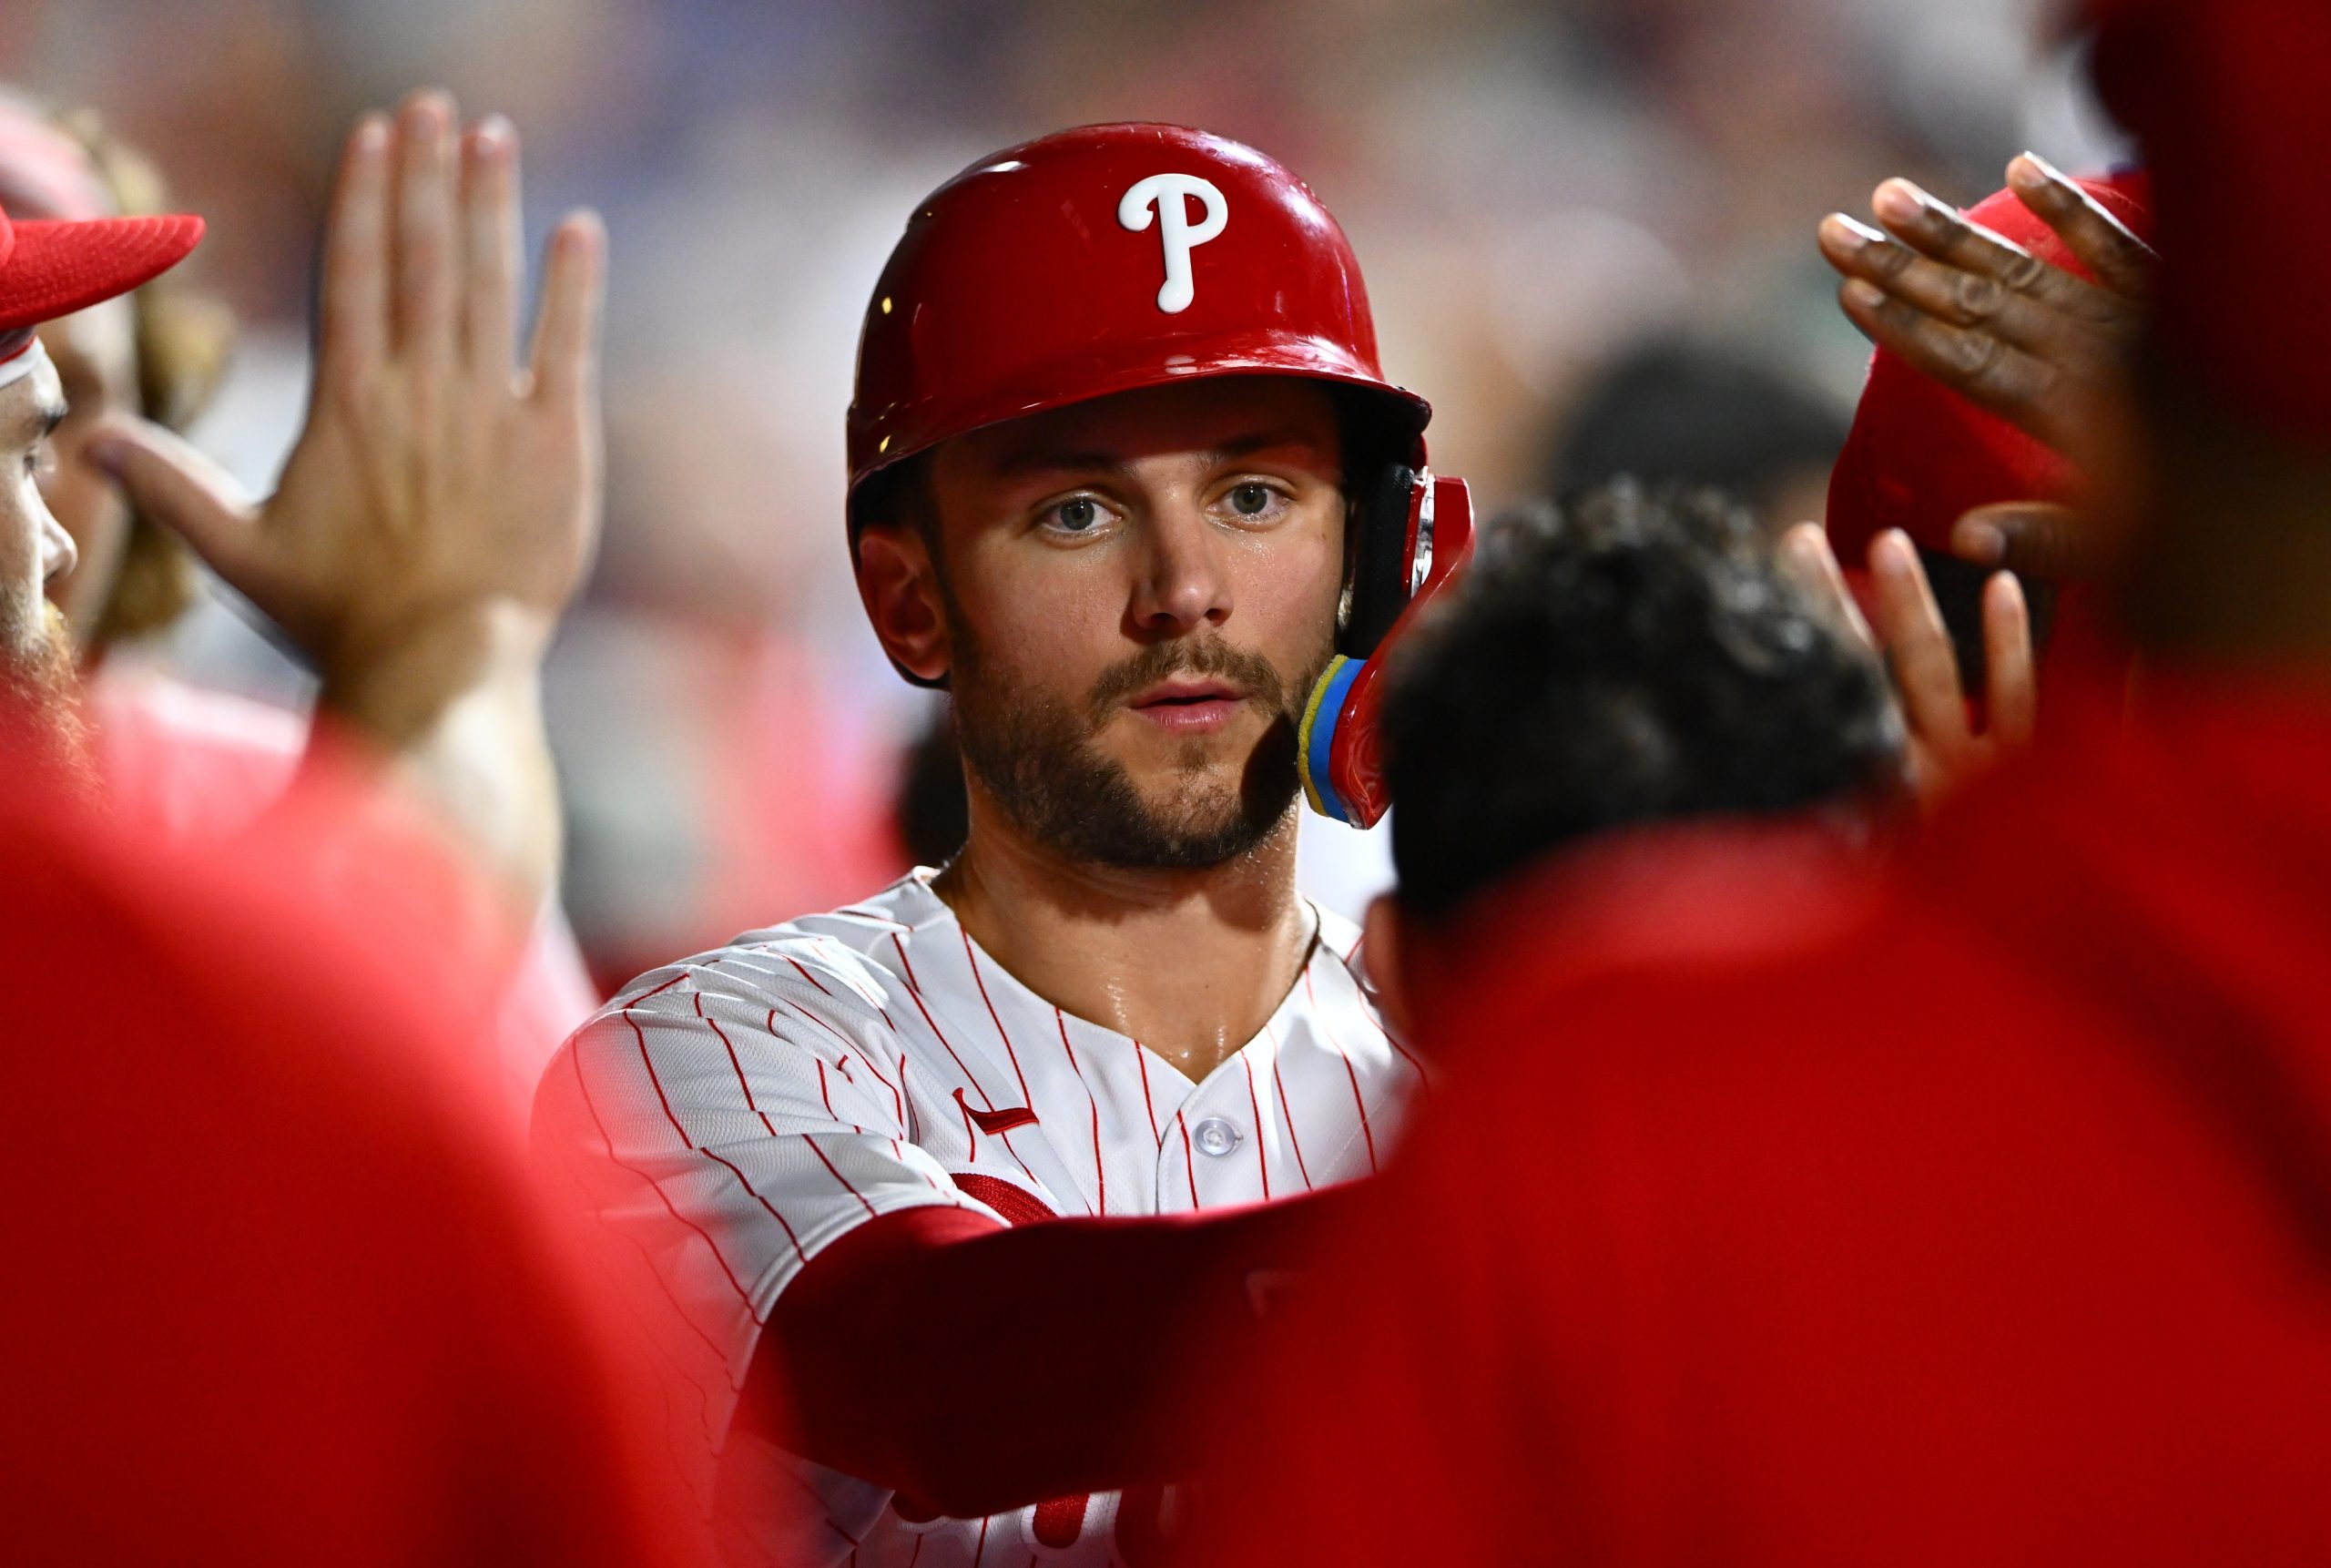 Turner Shines Amid Mixed Results on Phillies' Homestand